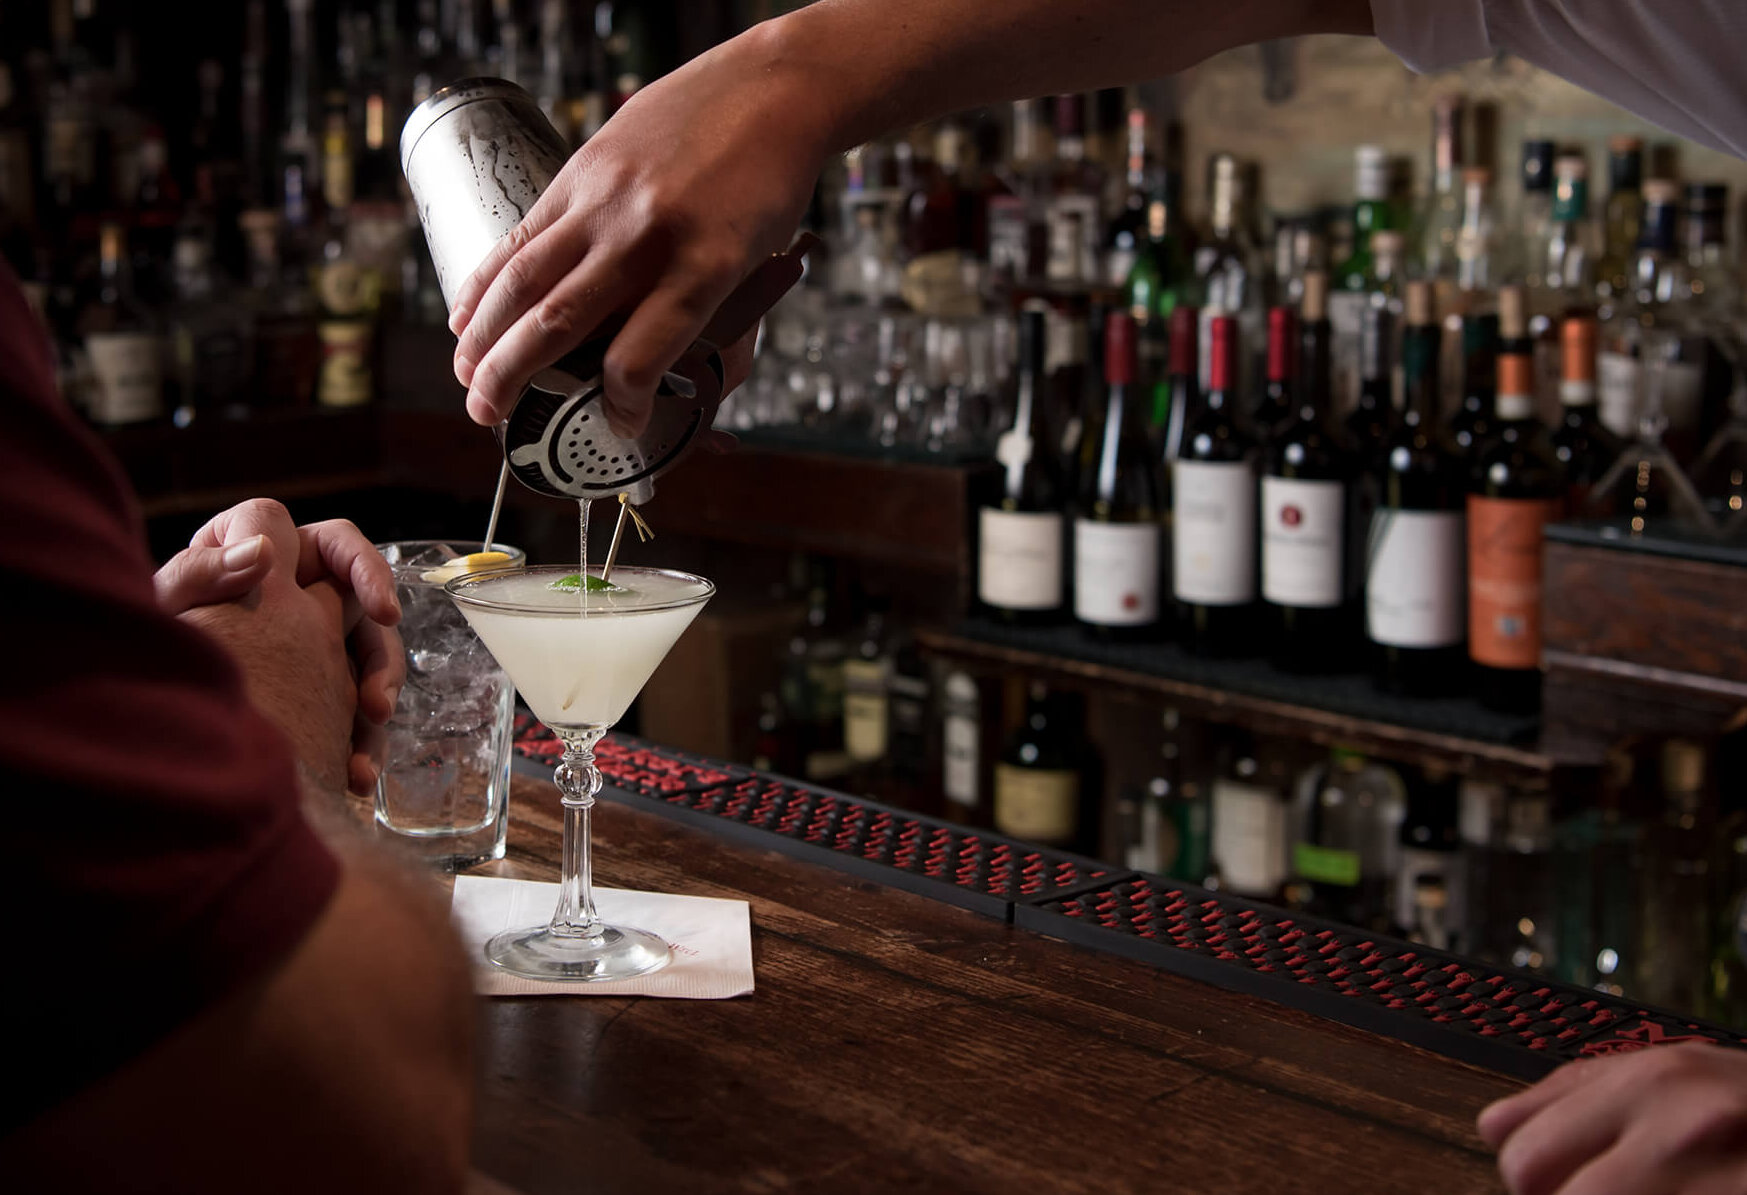 Bartender pouring a cocktail into a martini glass.